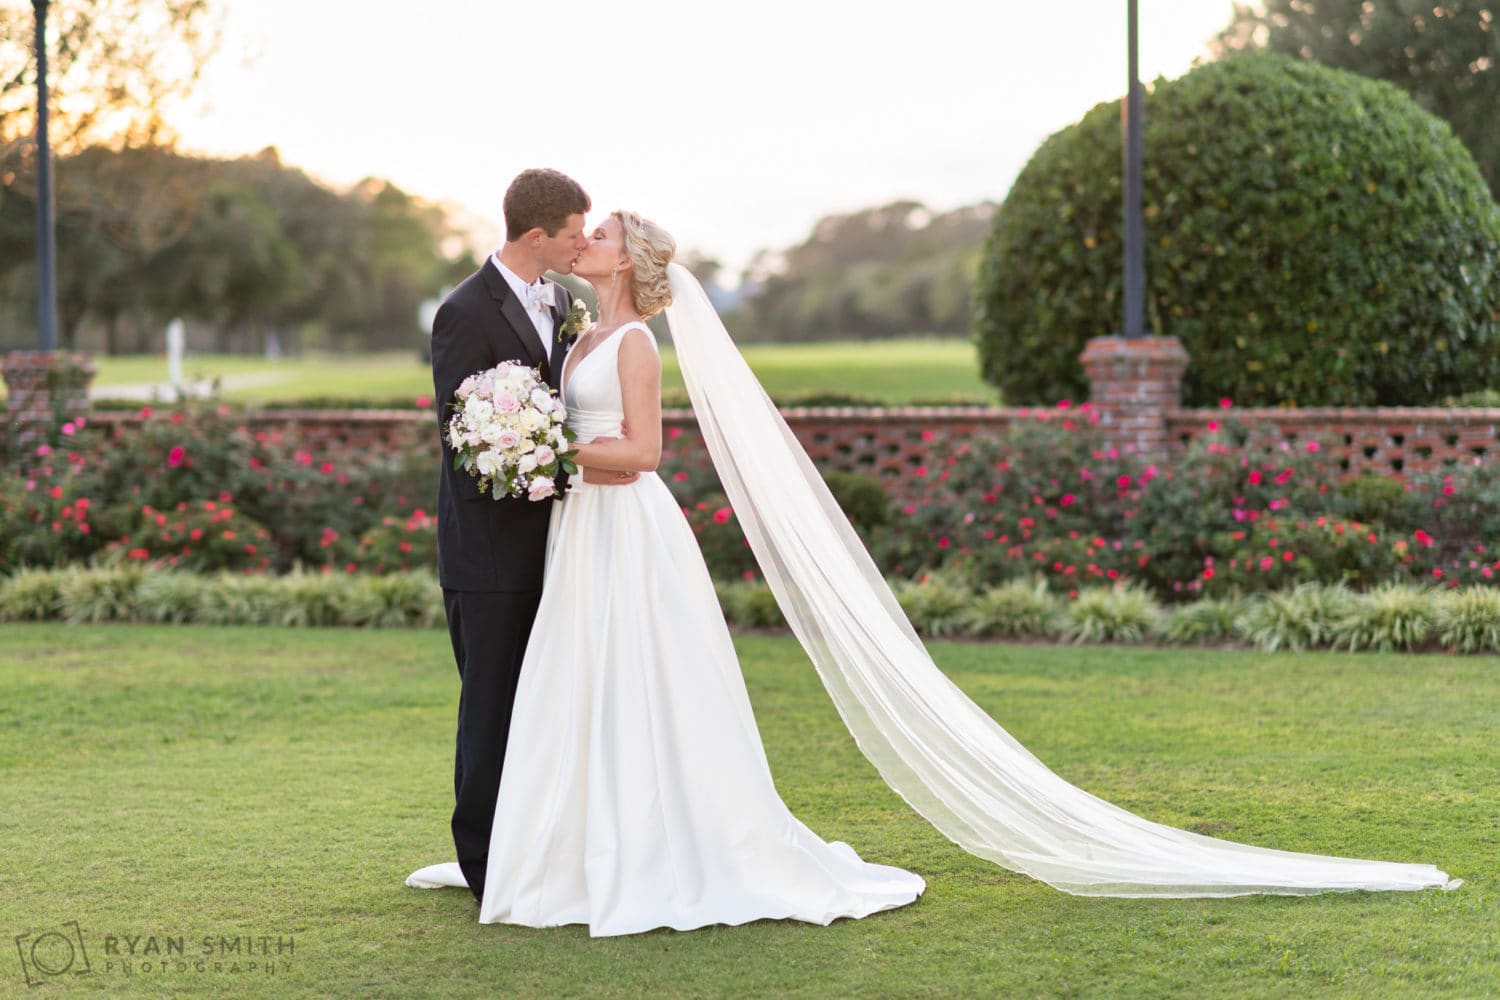 Kiss on the lawn - Pine Lakes Country Club